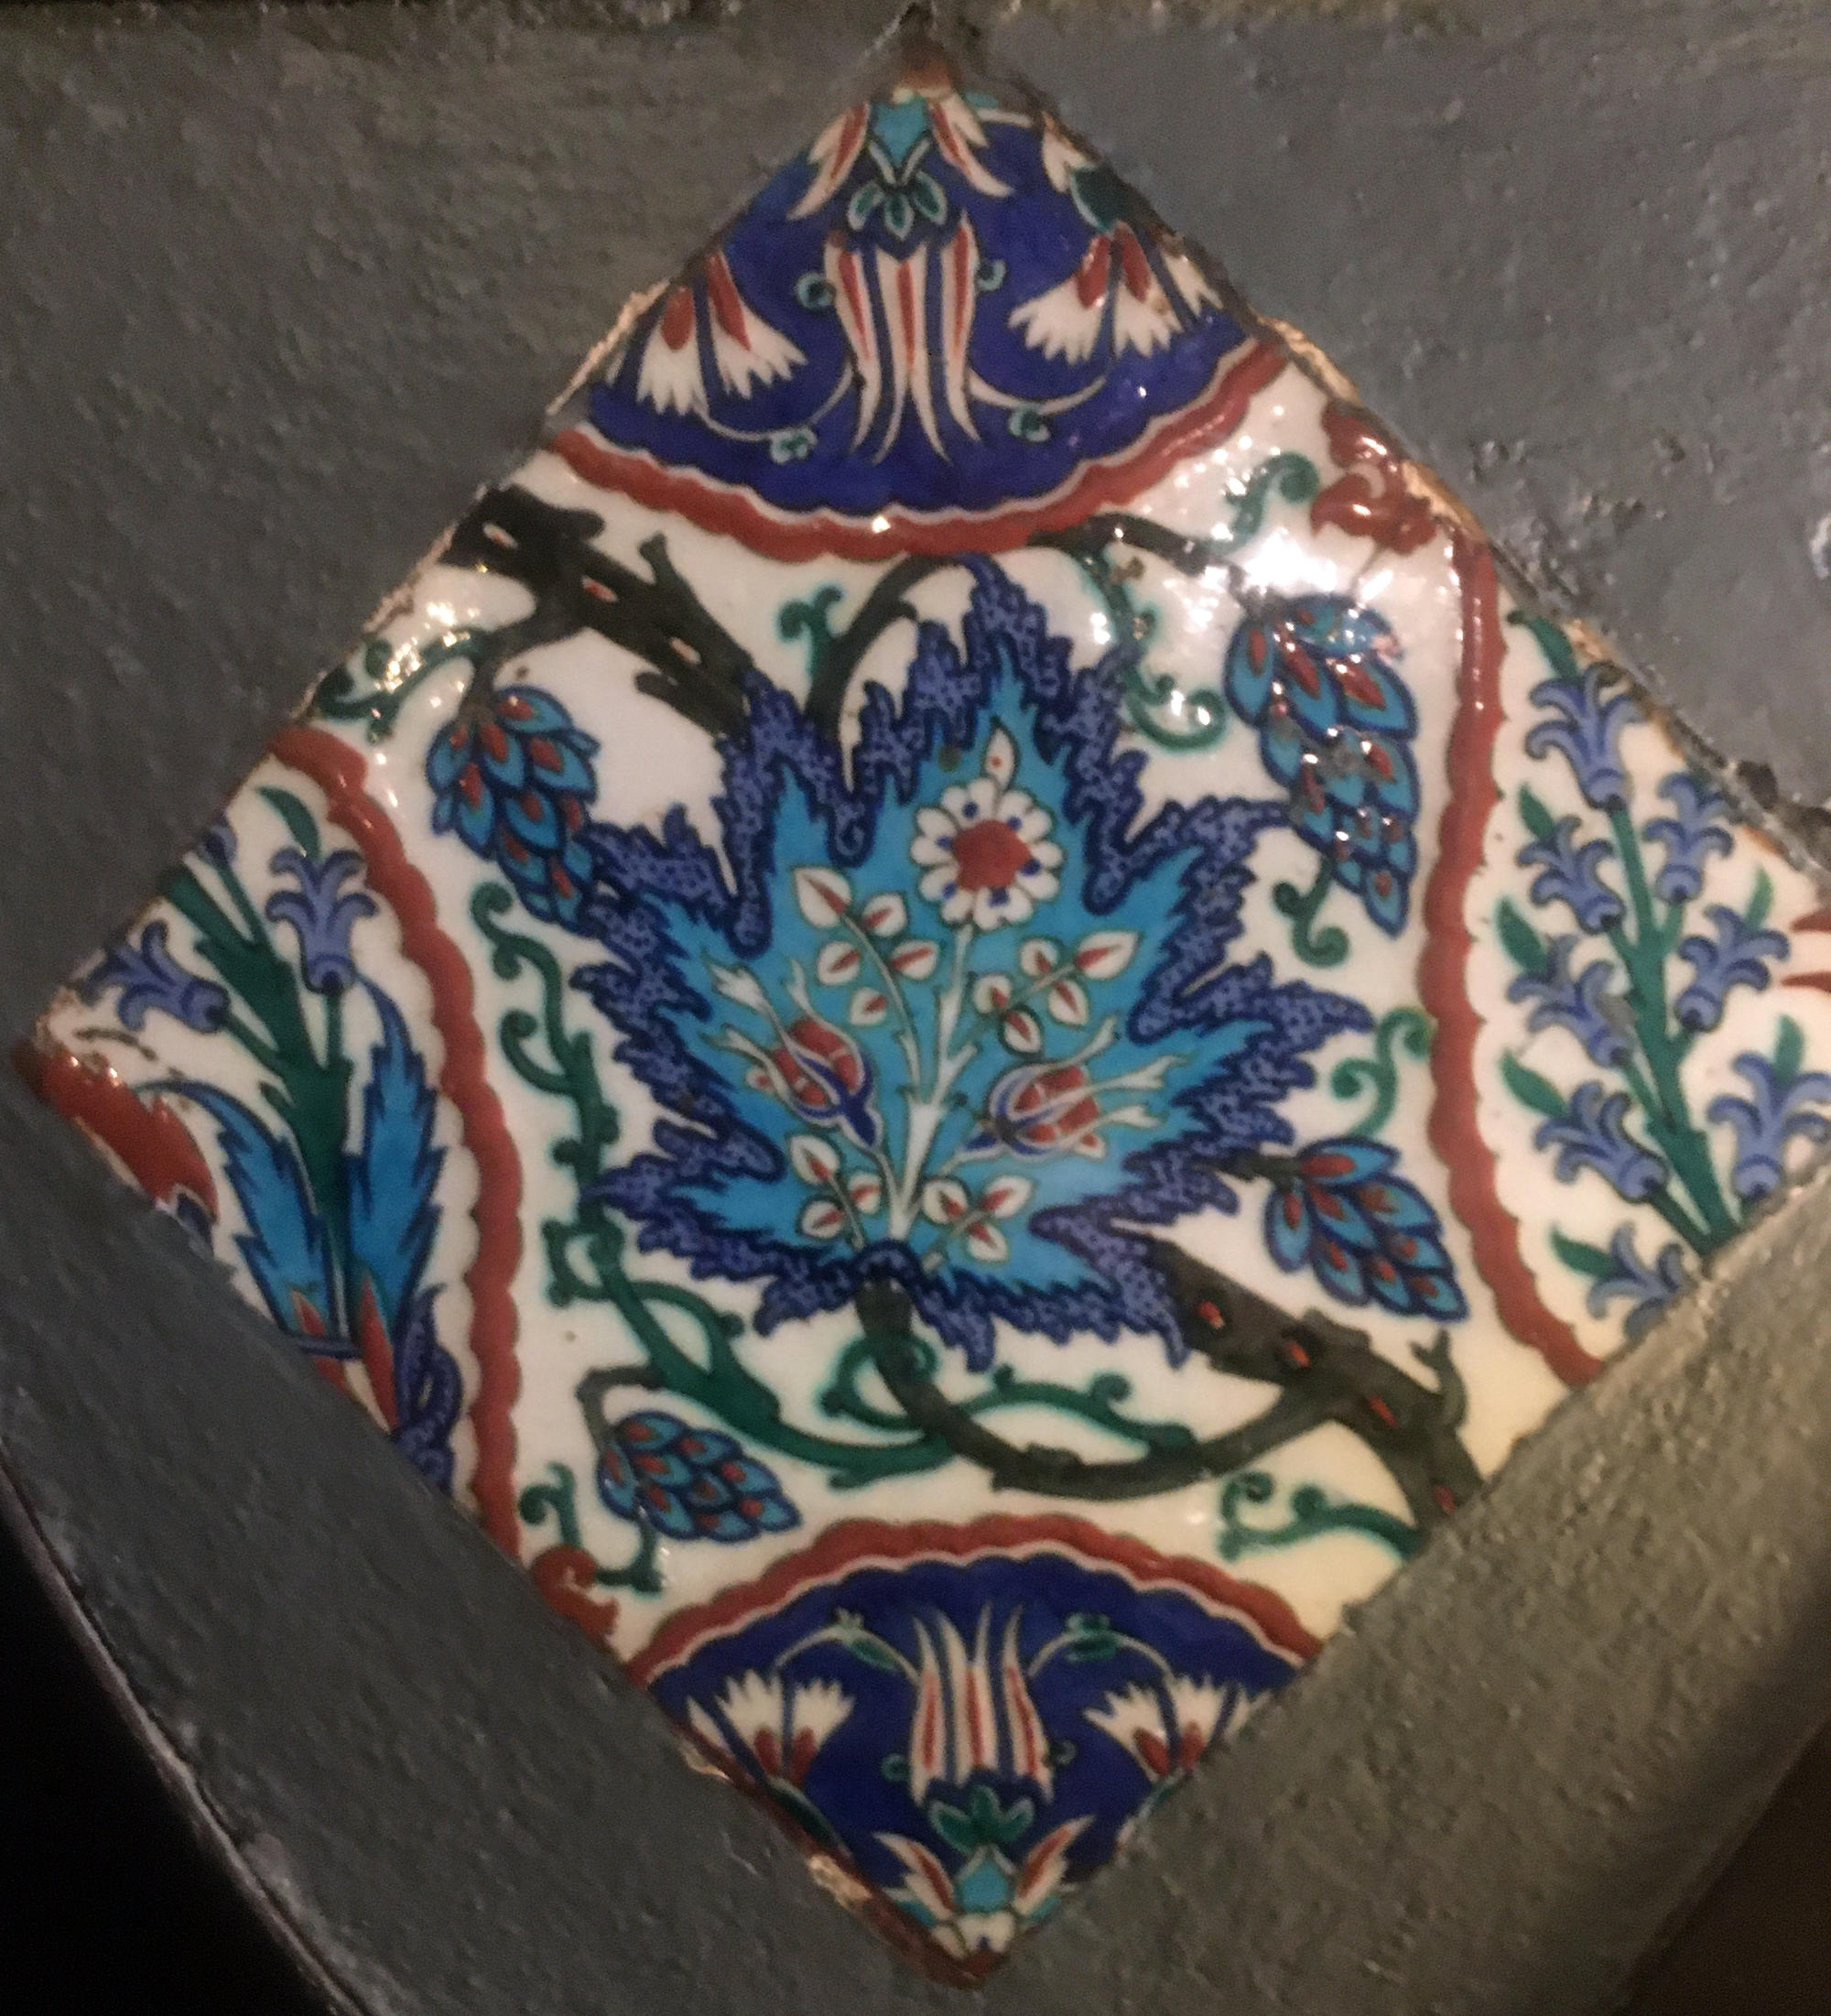 A square blue, white, red, and green ceramic tile with a central stylized grape leaf, nearly identical to the Gardner’s tile.